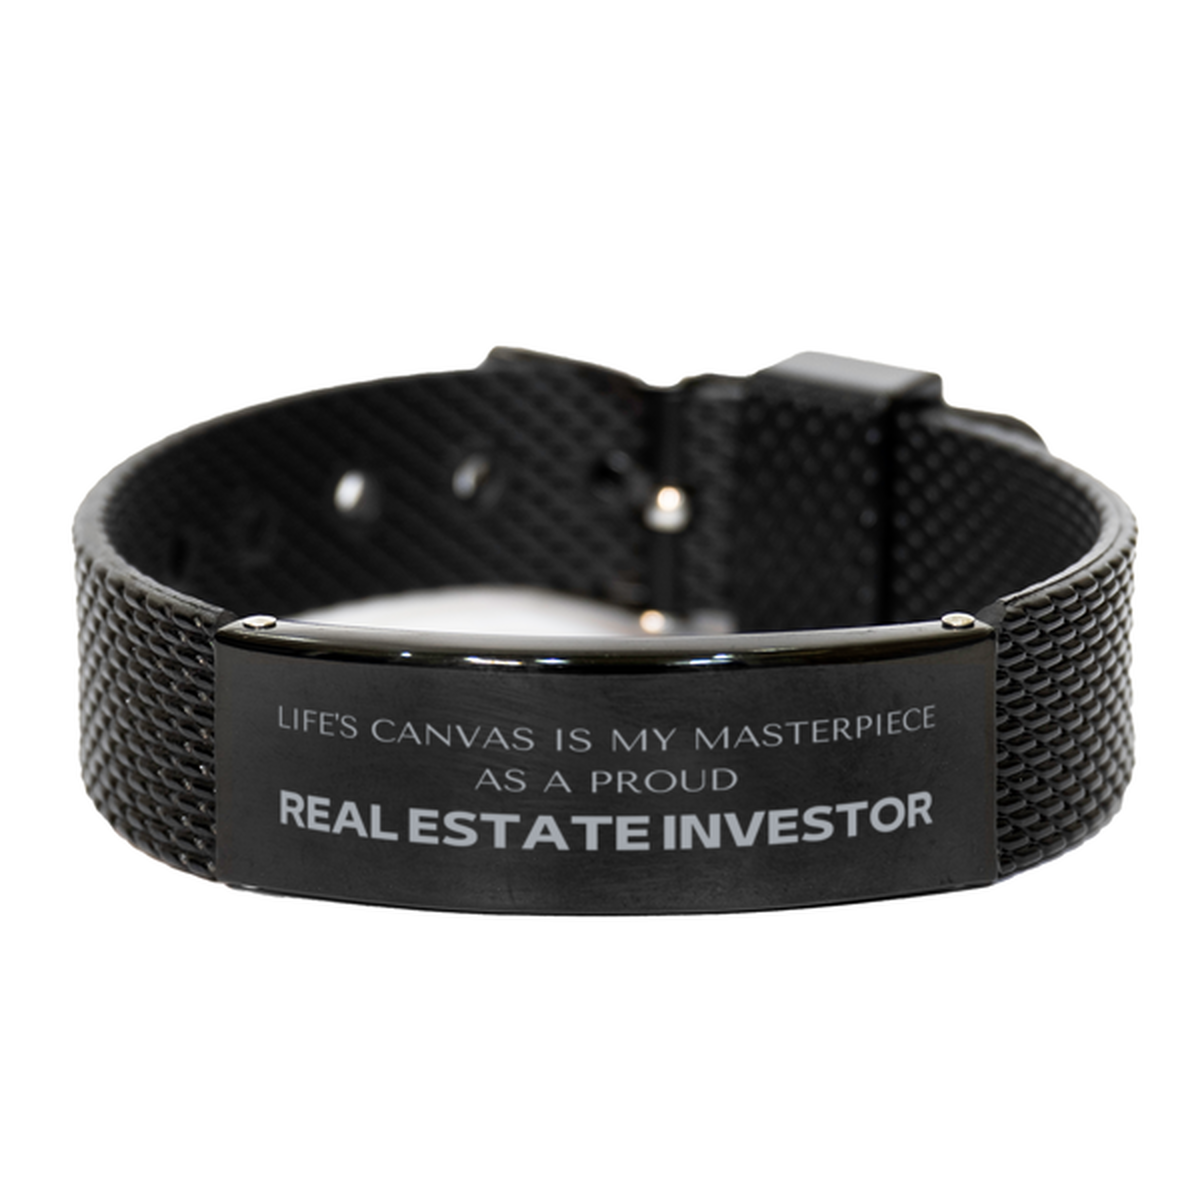 Proud Real Estate Investor Gifts, Life's canvas is my masterpiece, Epic Birthday Christmas Unique Black Shark Mesh Bracelet For Real Estate Investor, Coworkers, Men, Women, Friends